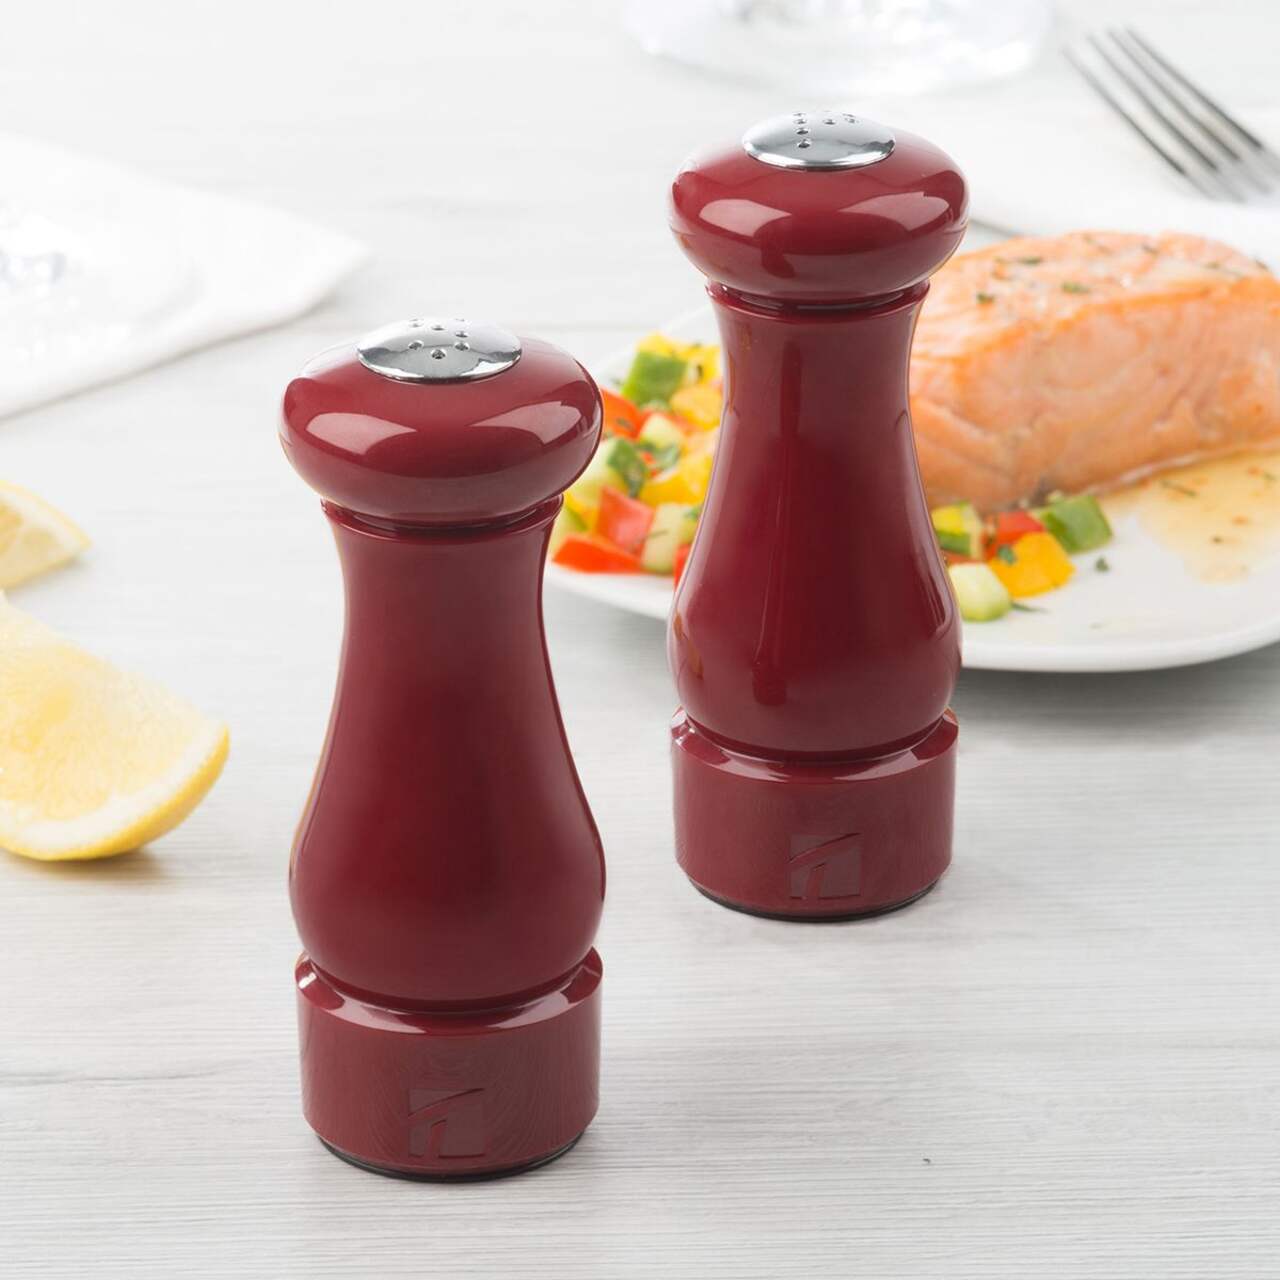 https://media-www.canadiantire.ca/product/living/kitchen/dining-and-entertaining/1424589/trudeau-maison-red-salt-and-pepper-shaker-25af5904-b814-4bd2-99c1-50980fdc2bfd-jpgrendition.jpg?imdensity=1&imwidth=1244&impolicy=mZoom